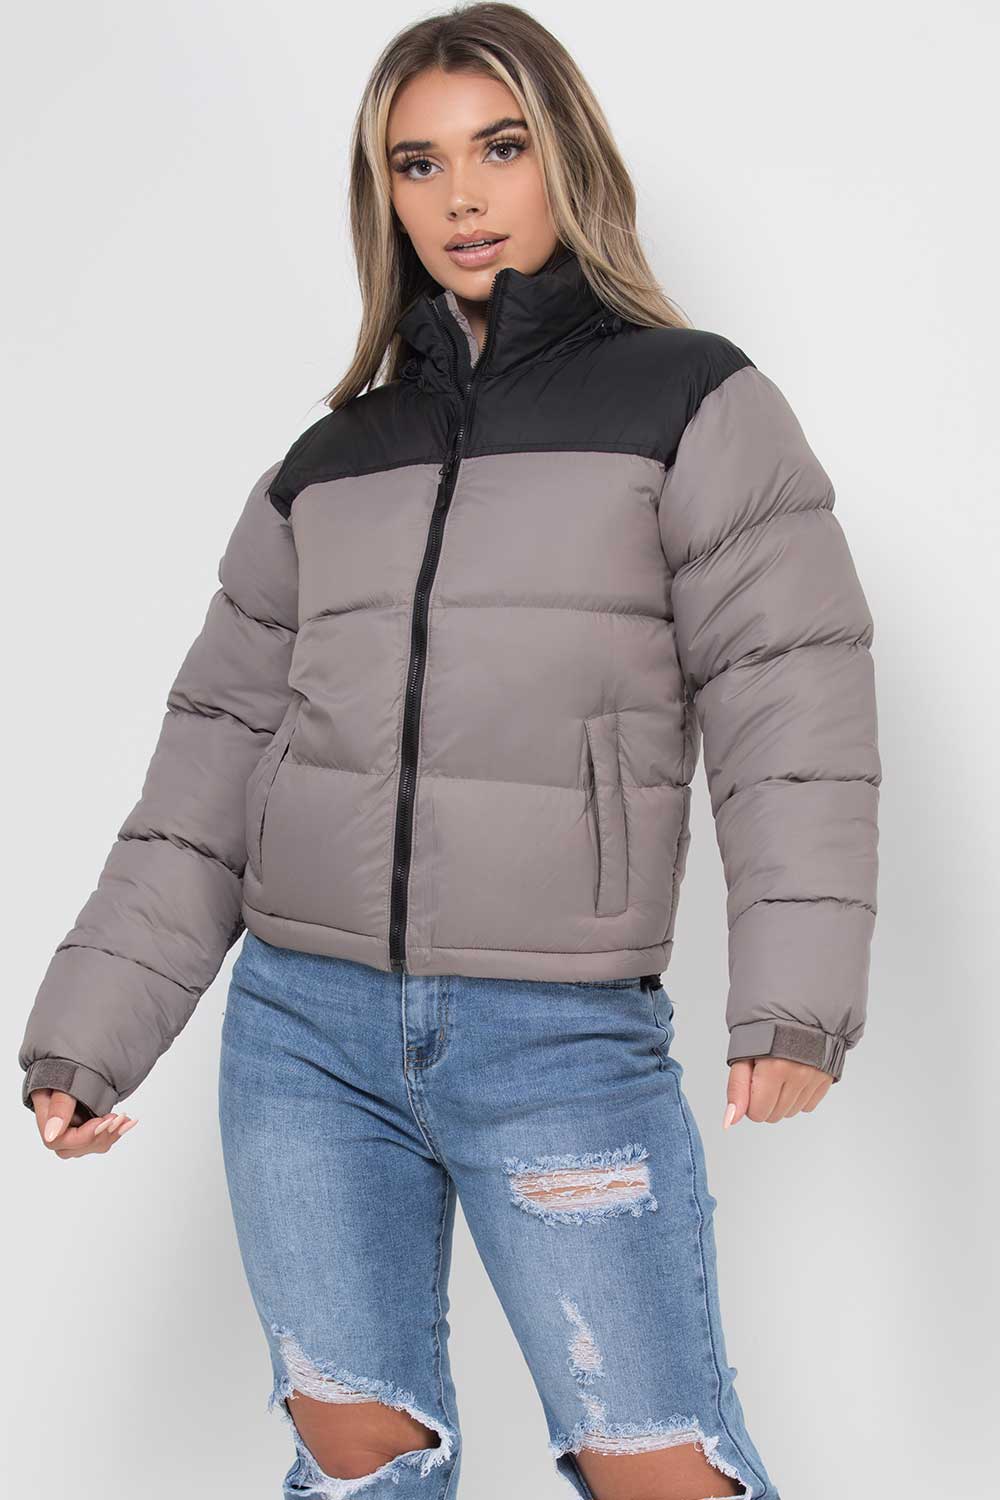 grey padded puffer jacket north face inspired